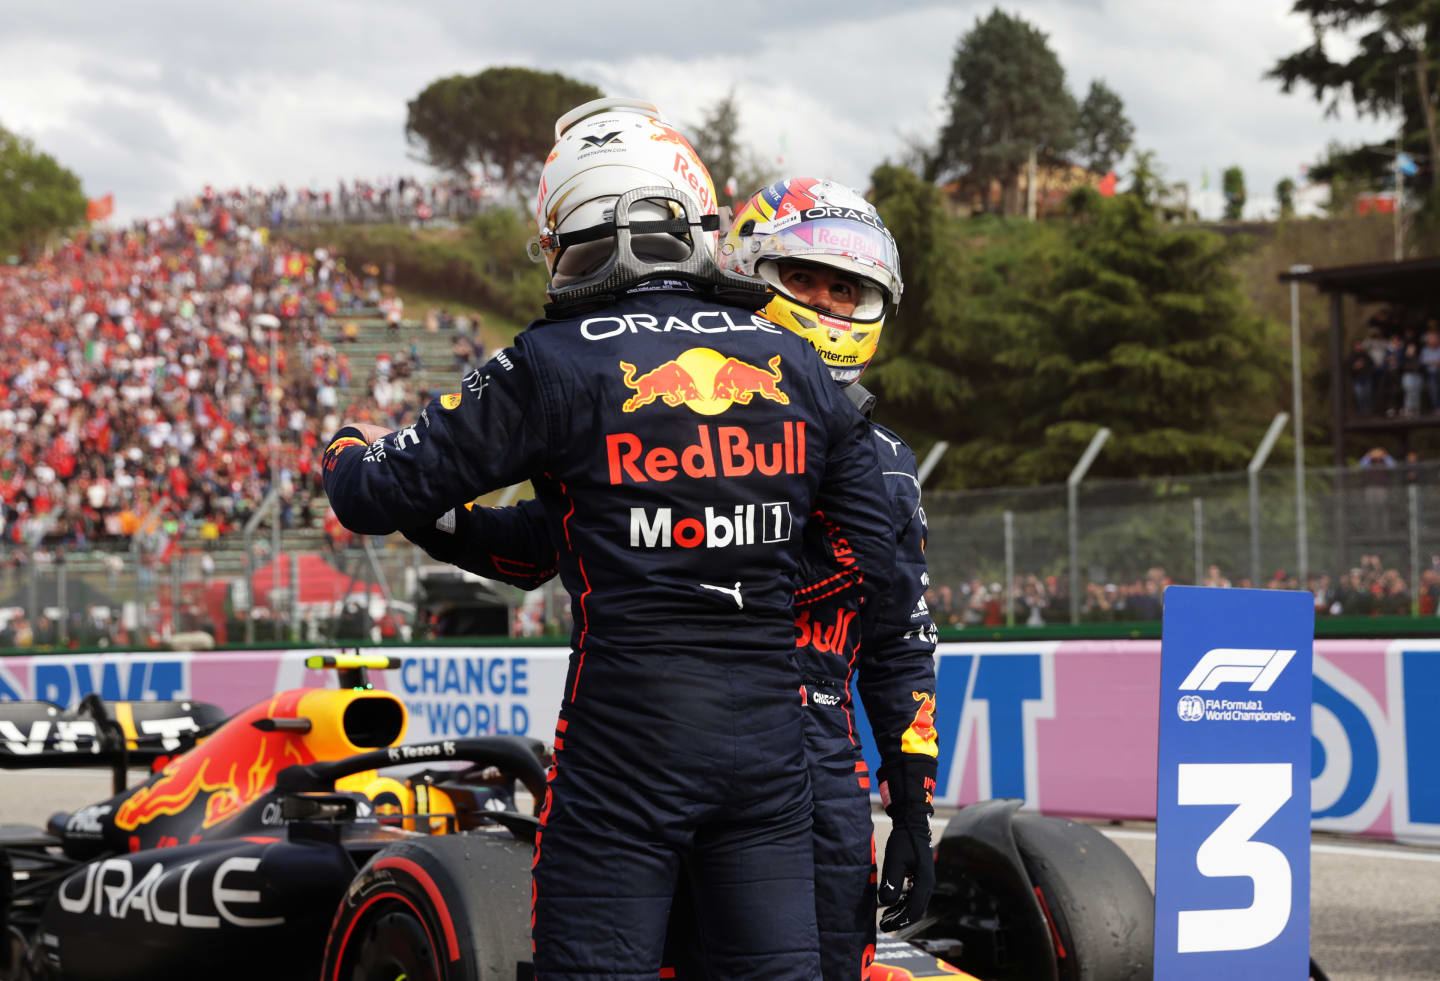 IMOLA, ITALY - APRIL 23: Sprint winner Max Verstappen of the Netherlands and Oracle Red Bull Racing and Third placed Sergio Perez of Mexico and Oracle Red Bull Racing hug in parc ferme during Sprint ahead of the F1 Grand Prix of Emilia Romagna at Autodromo Enzo e Dino Ferrari on April 23, 2022 in Imola, Italy. (Photo by Mark Thompson/Getty Images)